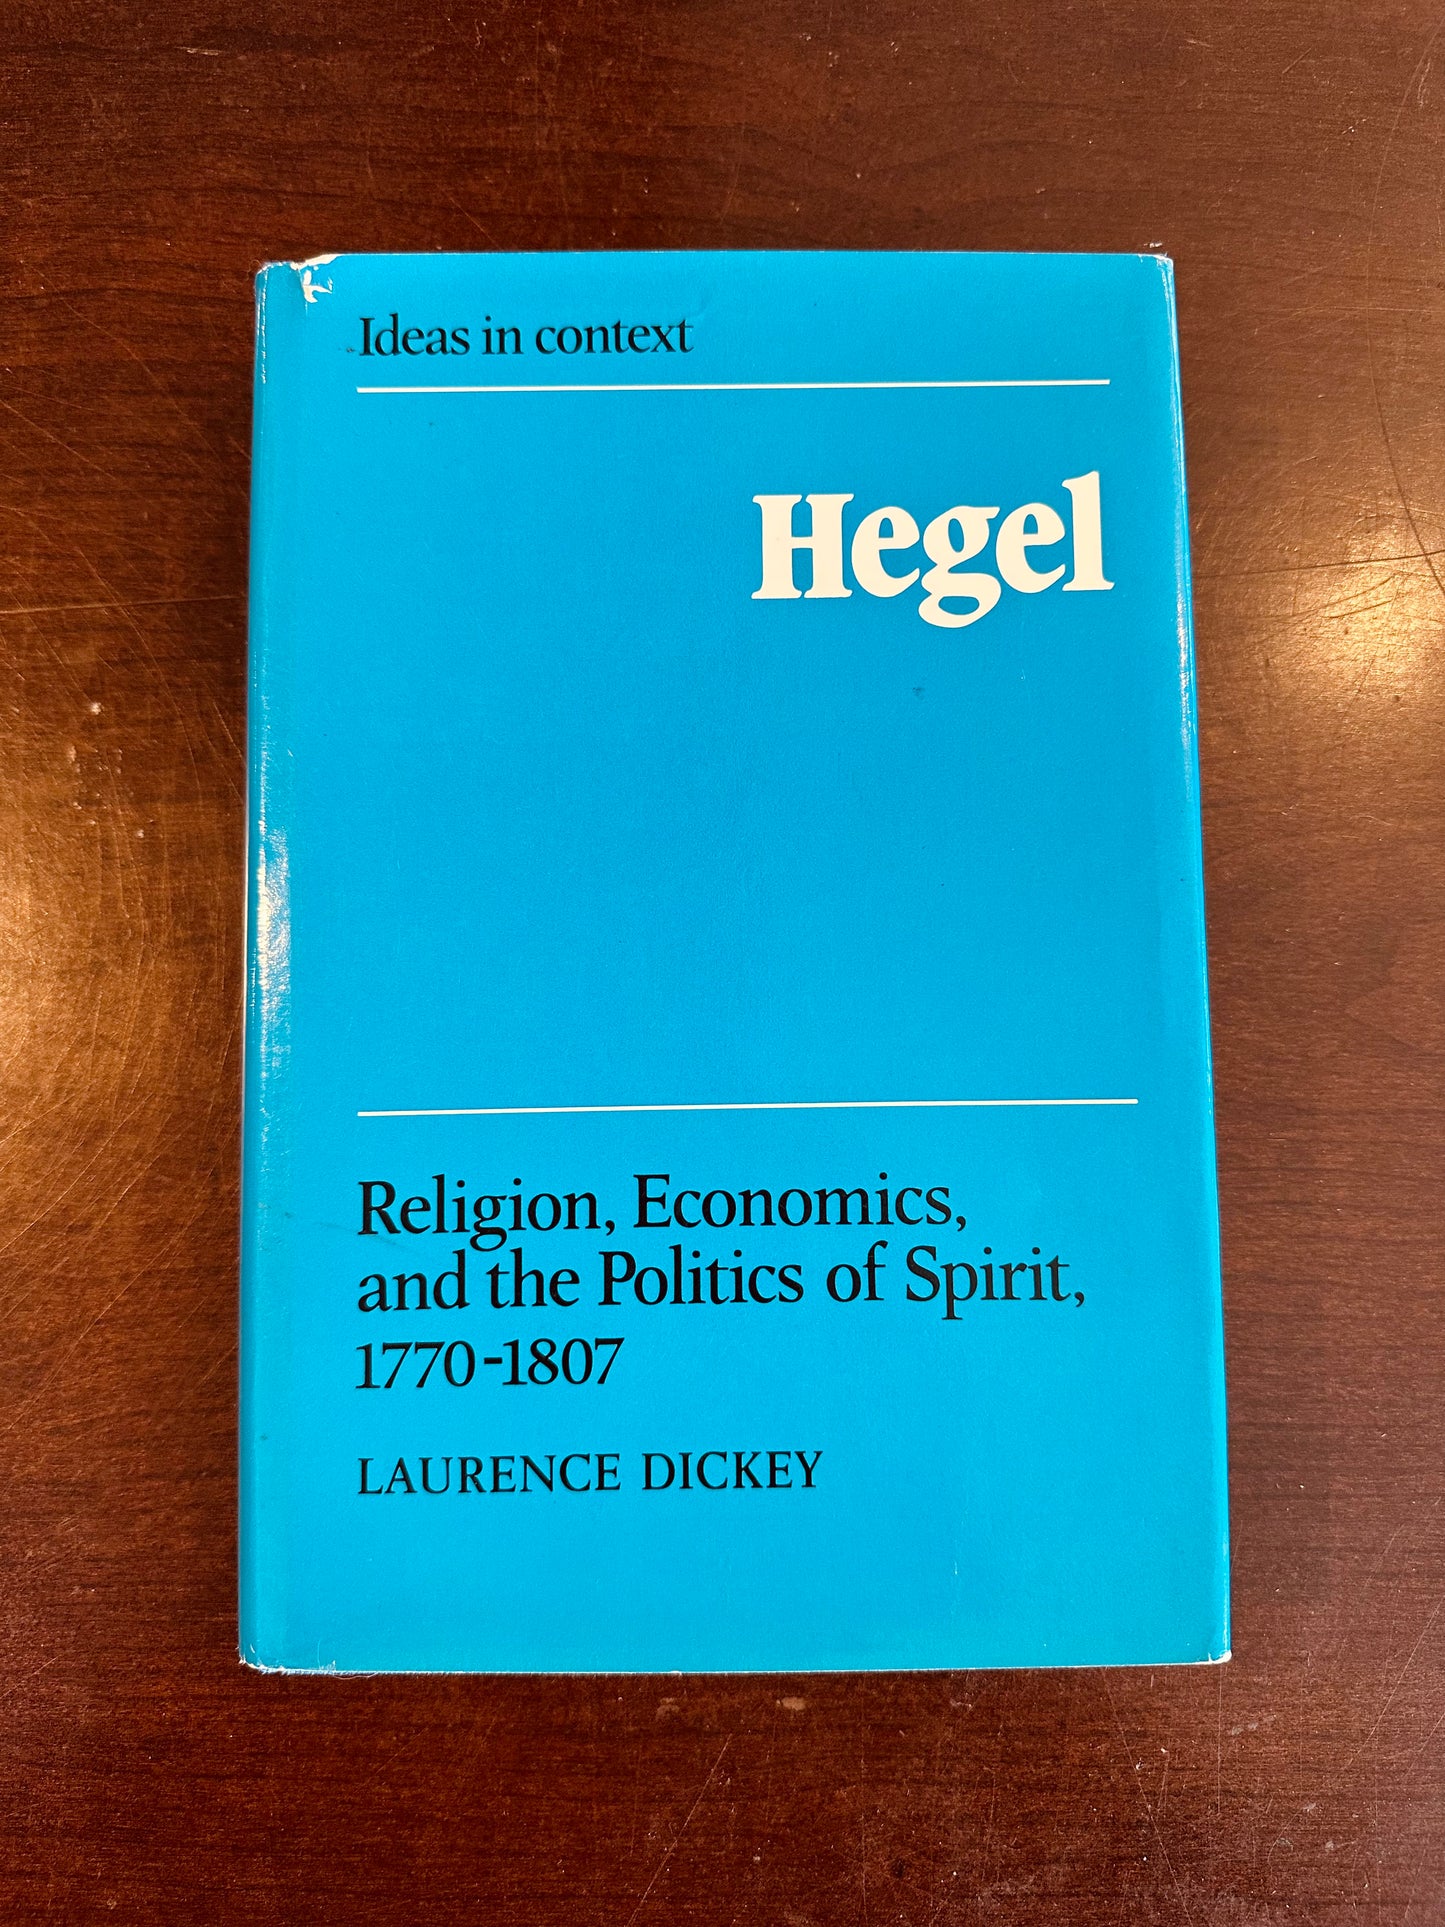 Ideas In Context: Hegel by Laurence Dickey